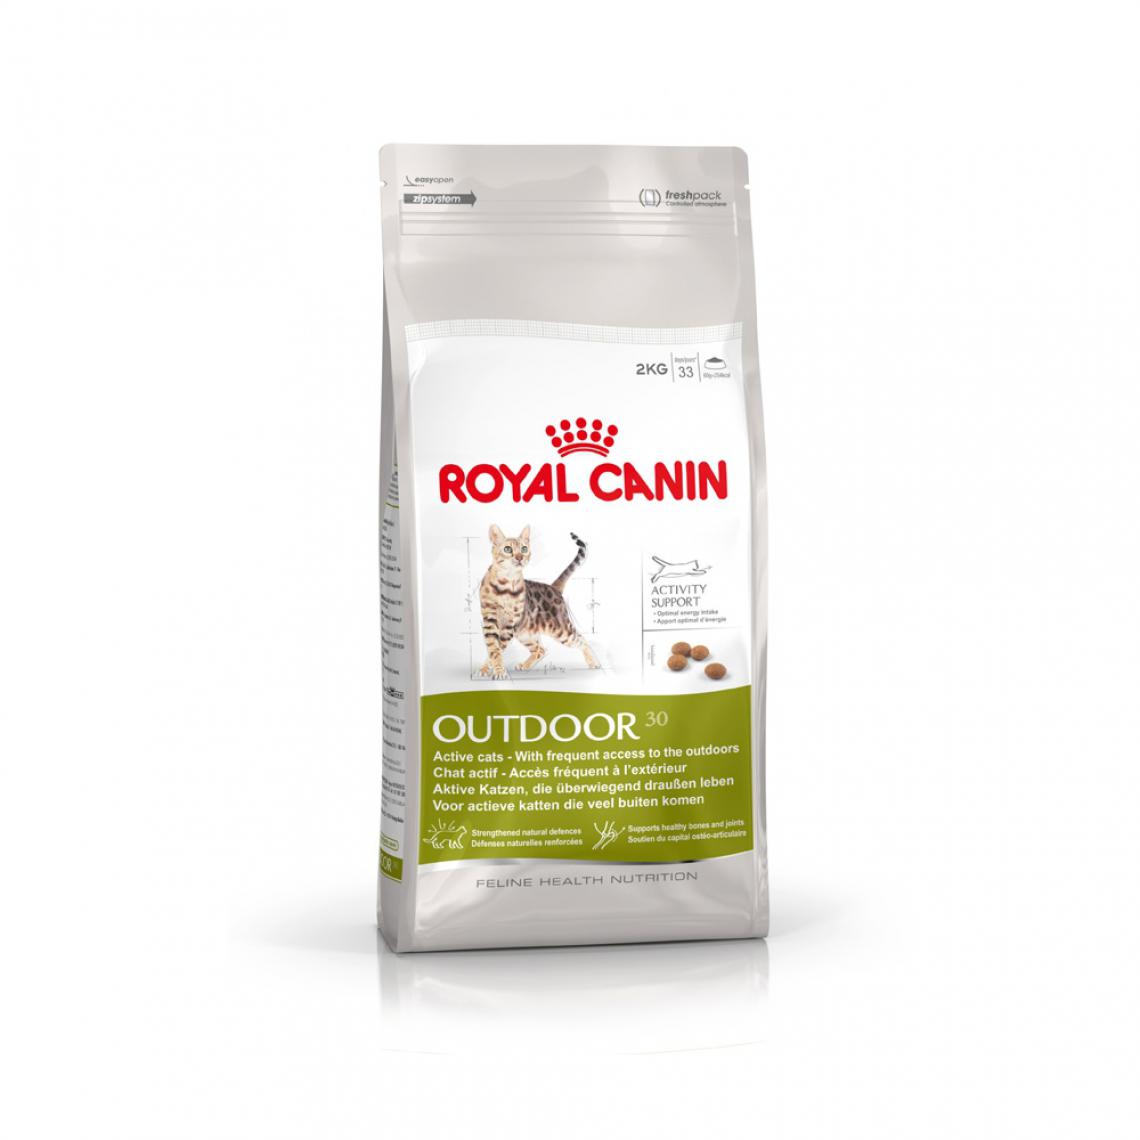 Royal Canin - Croquettes pour chat ROYAL CANIN Outdoor 30 2kg - Alimentation humide pour chat